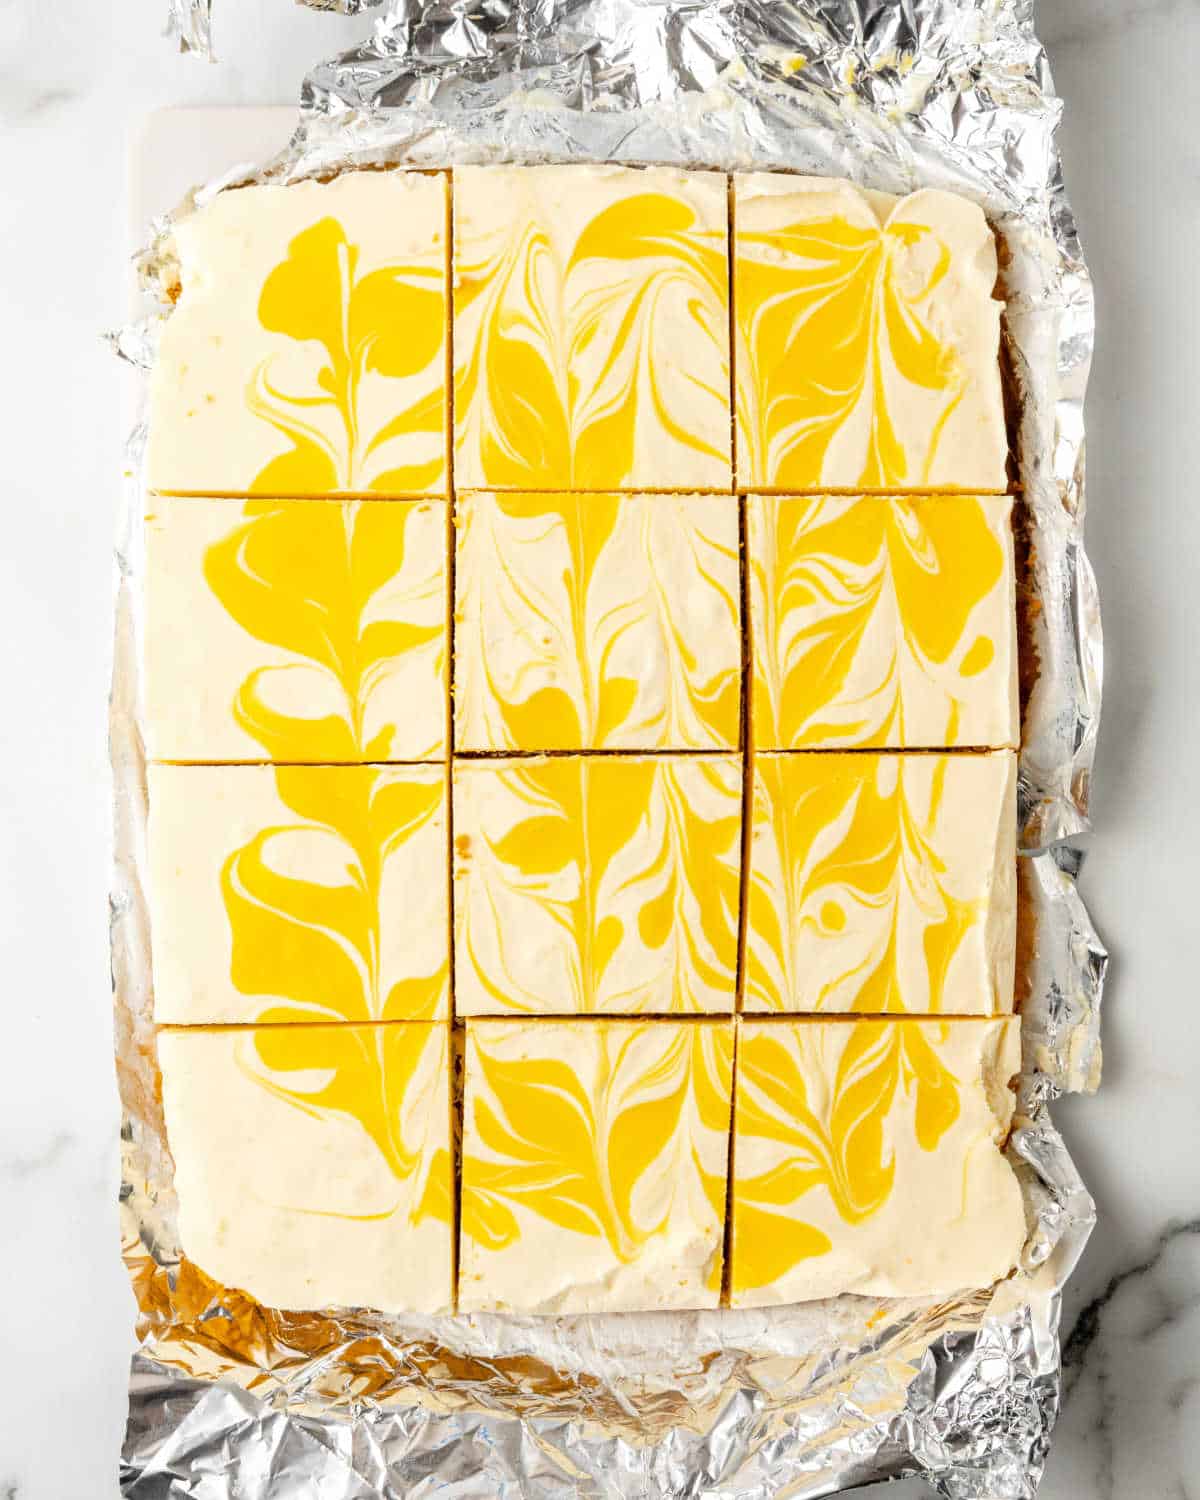 Cut squares of a rectangular passionfruit cheesecake on aluminum paper.